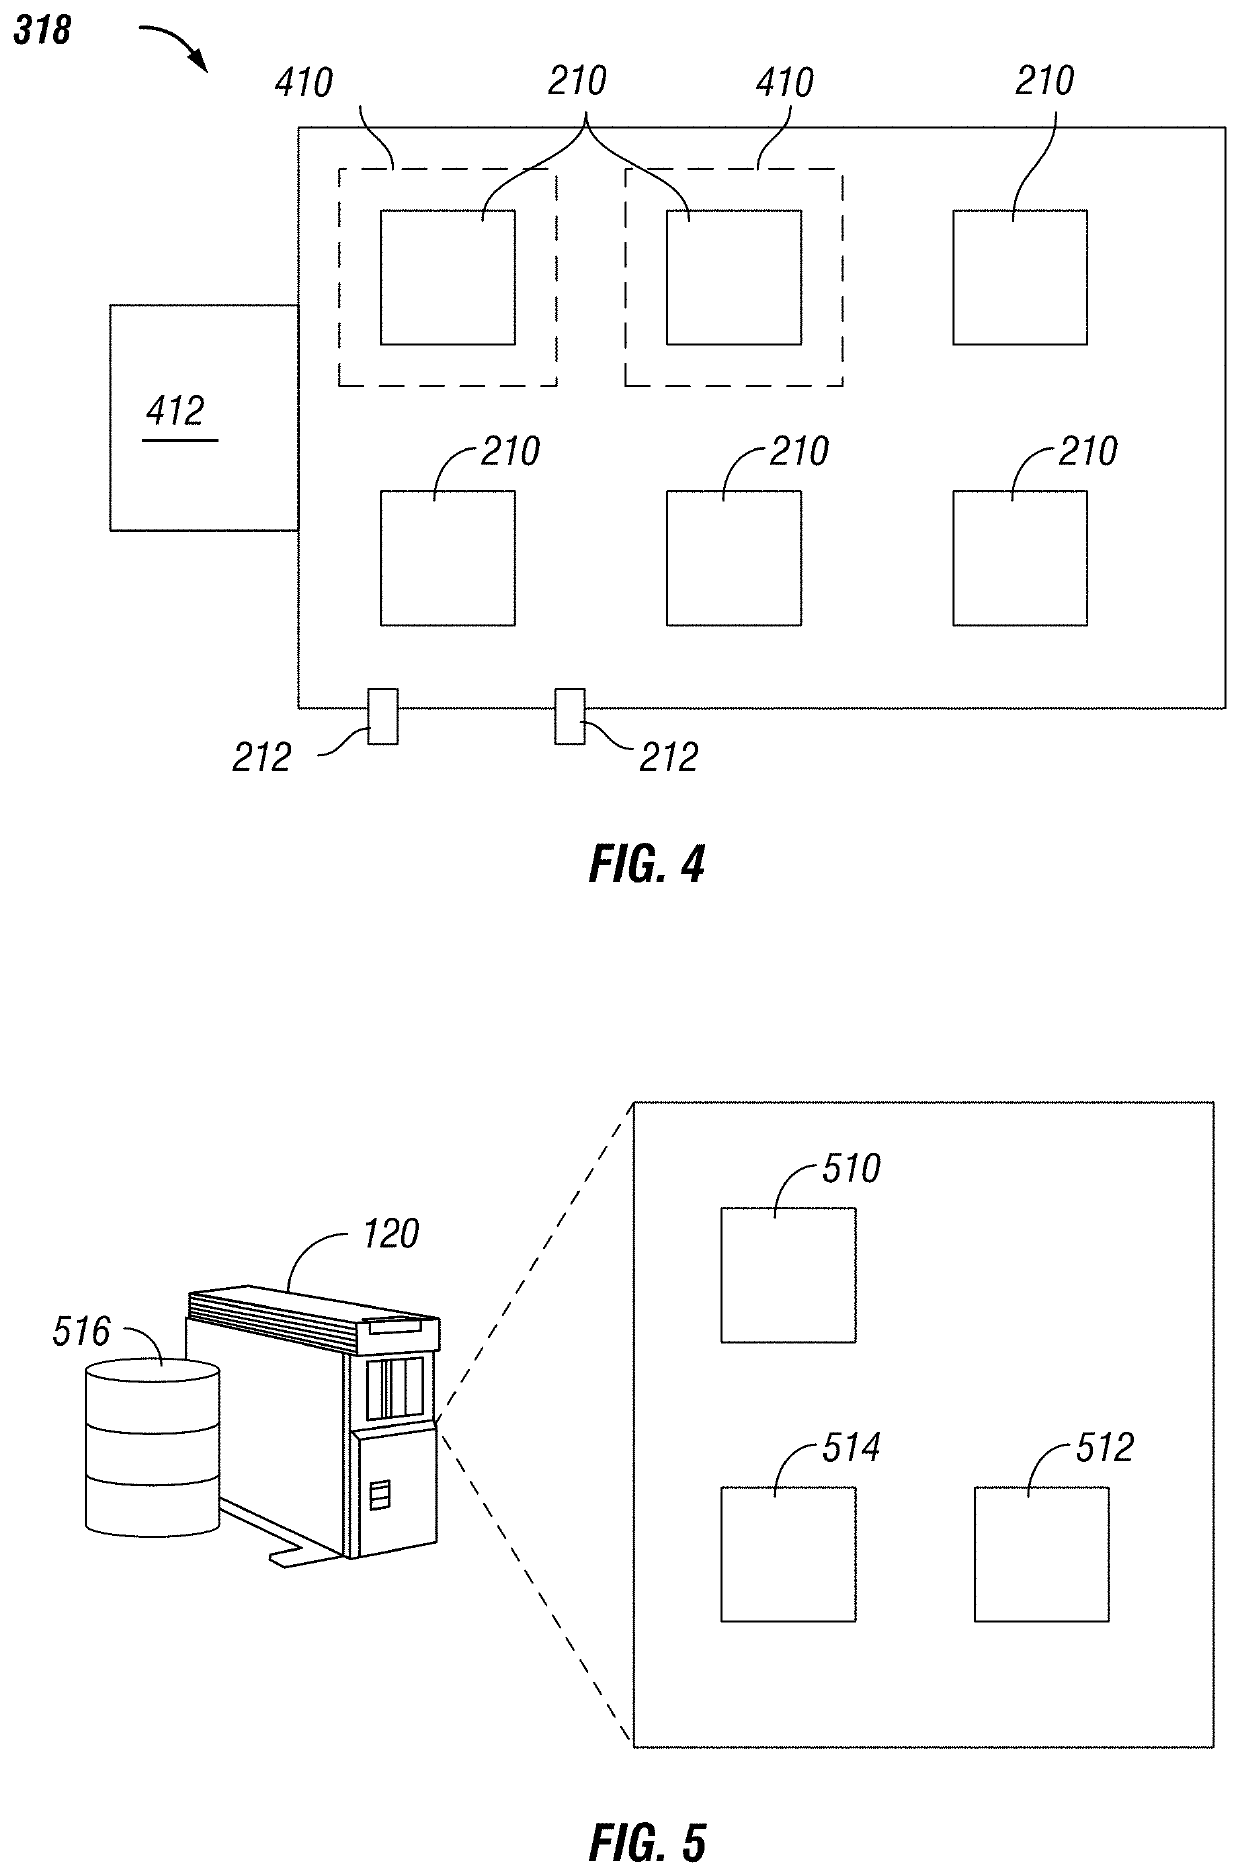 Systems and methods for determining compliance with an entity's standard operating procedures